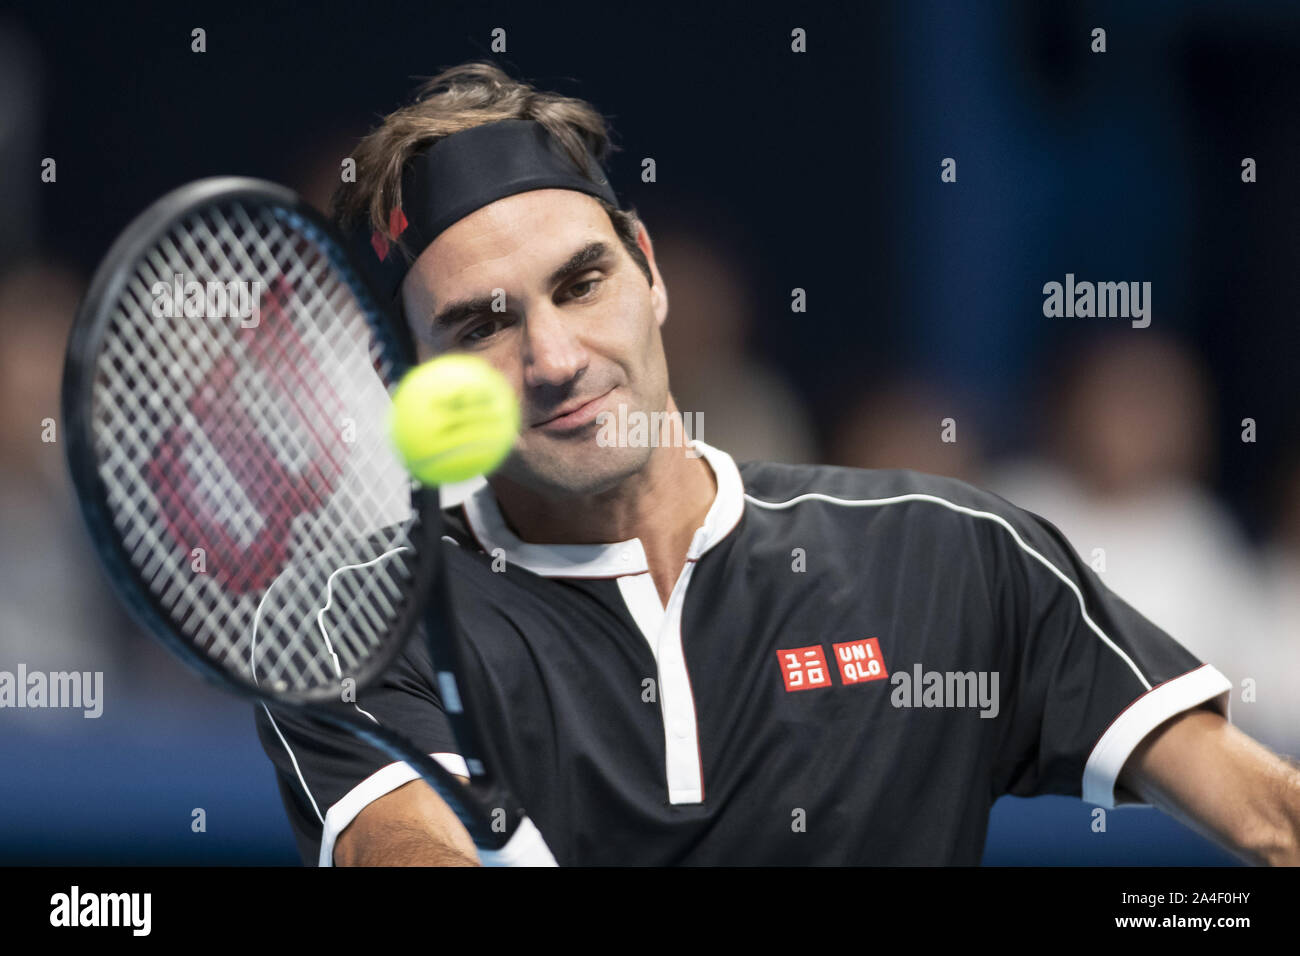 Tokyo, Japan. 14th Oct, 2019. Roger Federer is in his match v John Isner  during the UNIQLO Life Wear Day Tokyo charity event at Ariake Coliseum.  Professional tennis player Roger Federer who